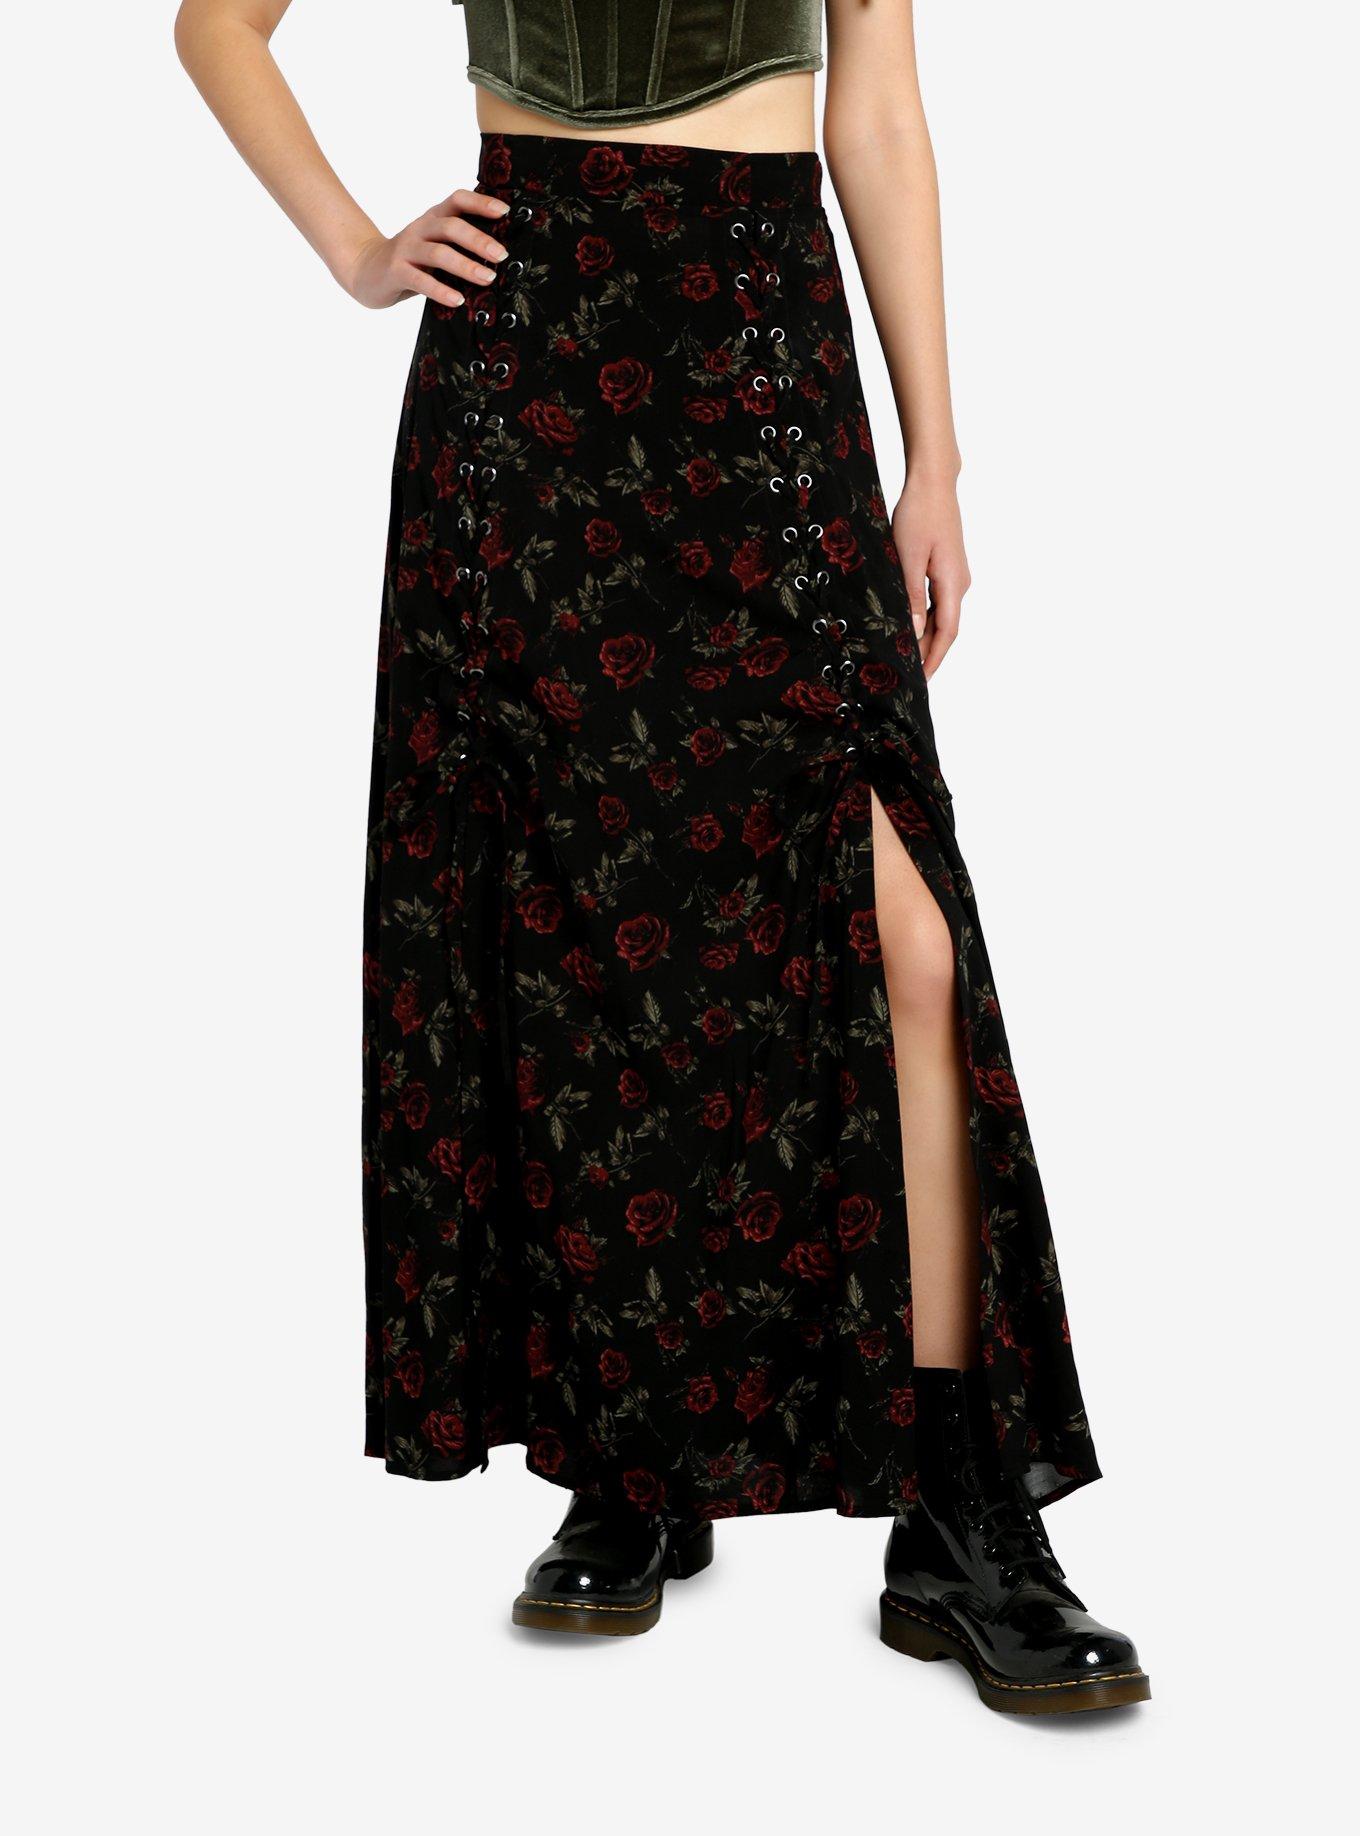 Thorn & Fable Dark Red Rose Lace-Up Maxi Skirt, RED, hi-res